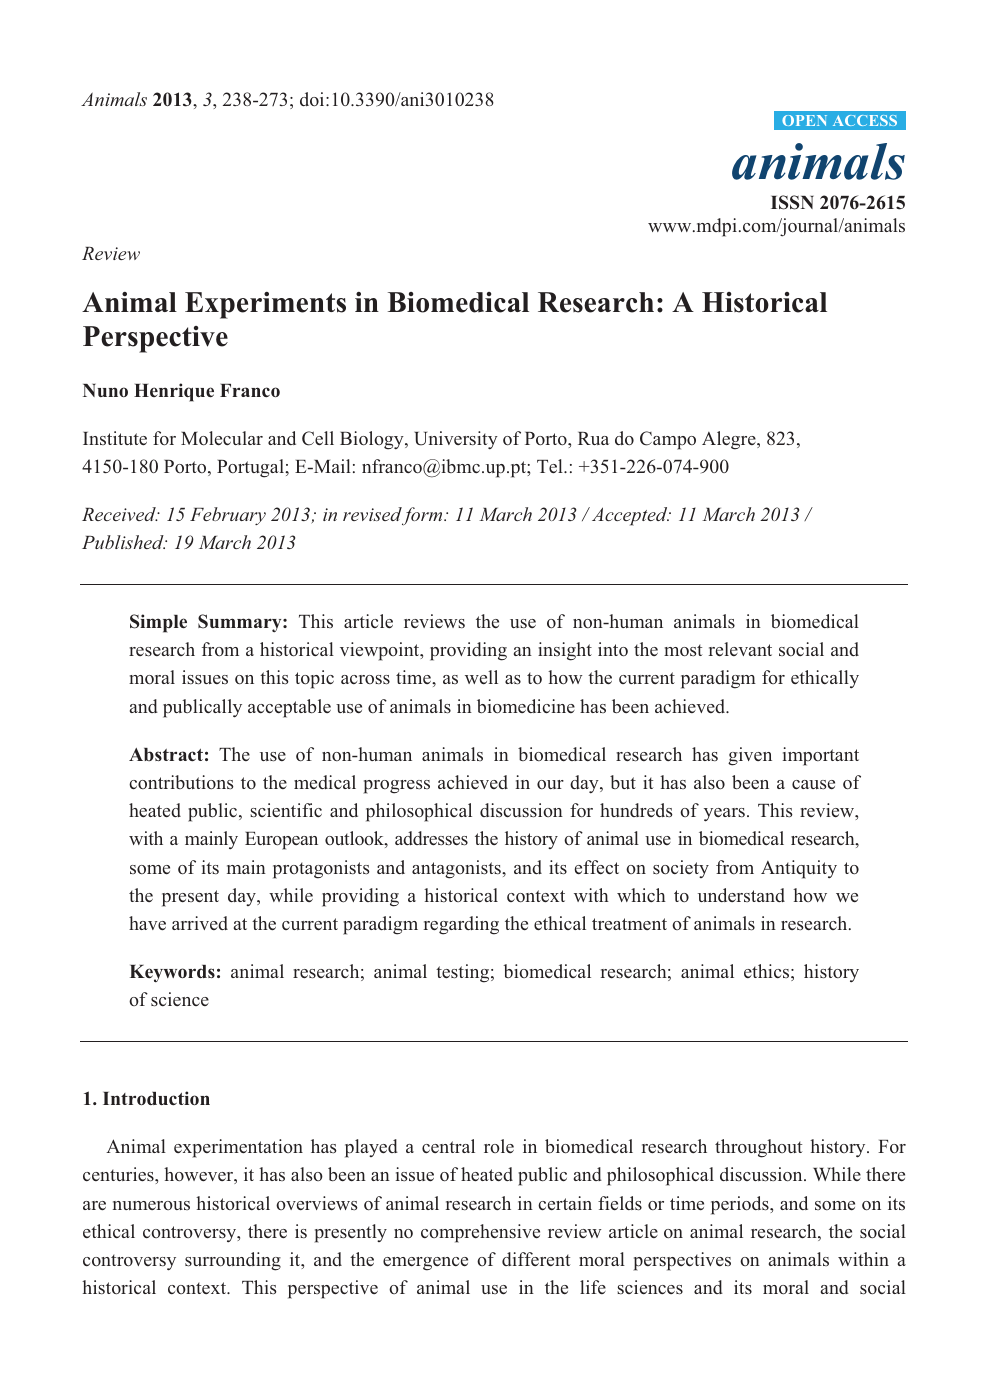 Animal Experiments in Biomedical Research: A Historical Perspective – topic  of research paper in History and archaeology. Download scholarly article  PDF and read for free on CyberLeninka open science hub.